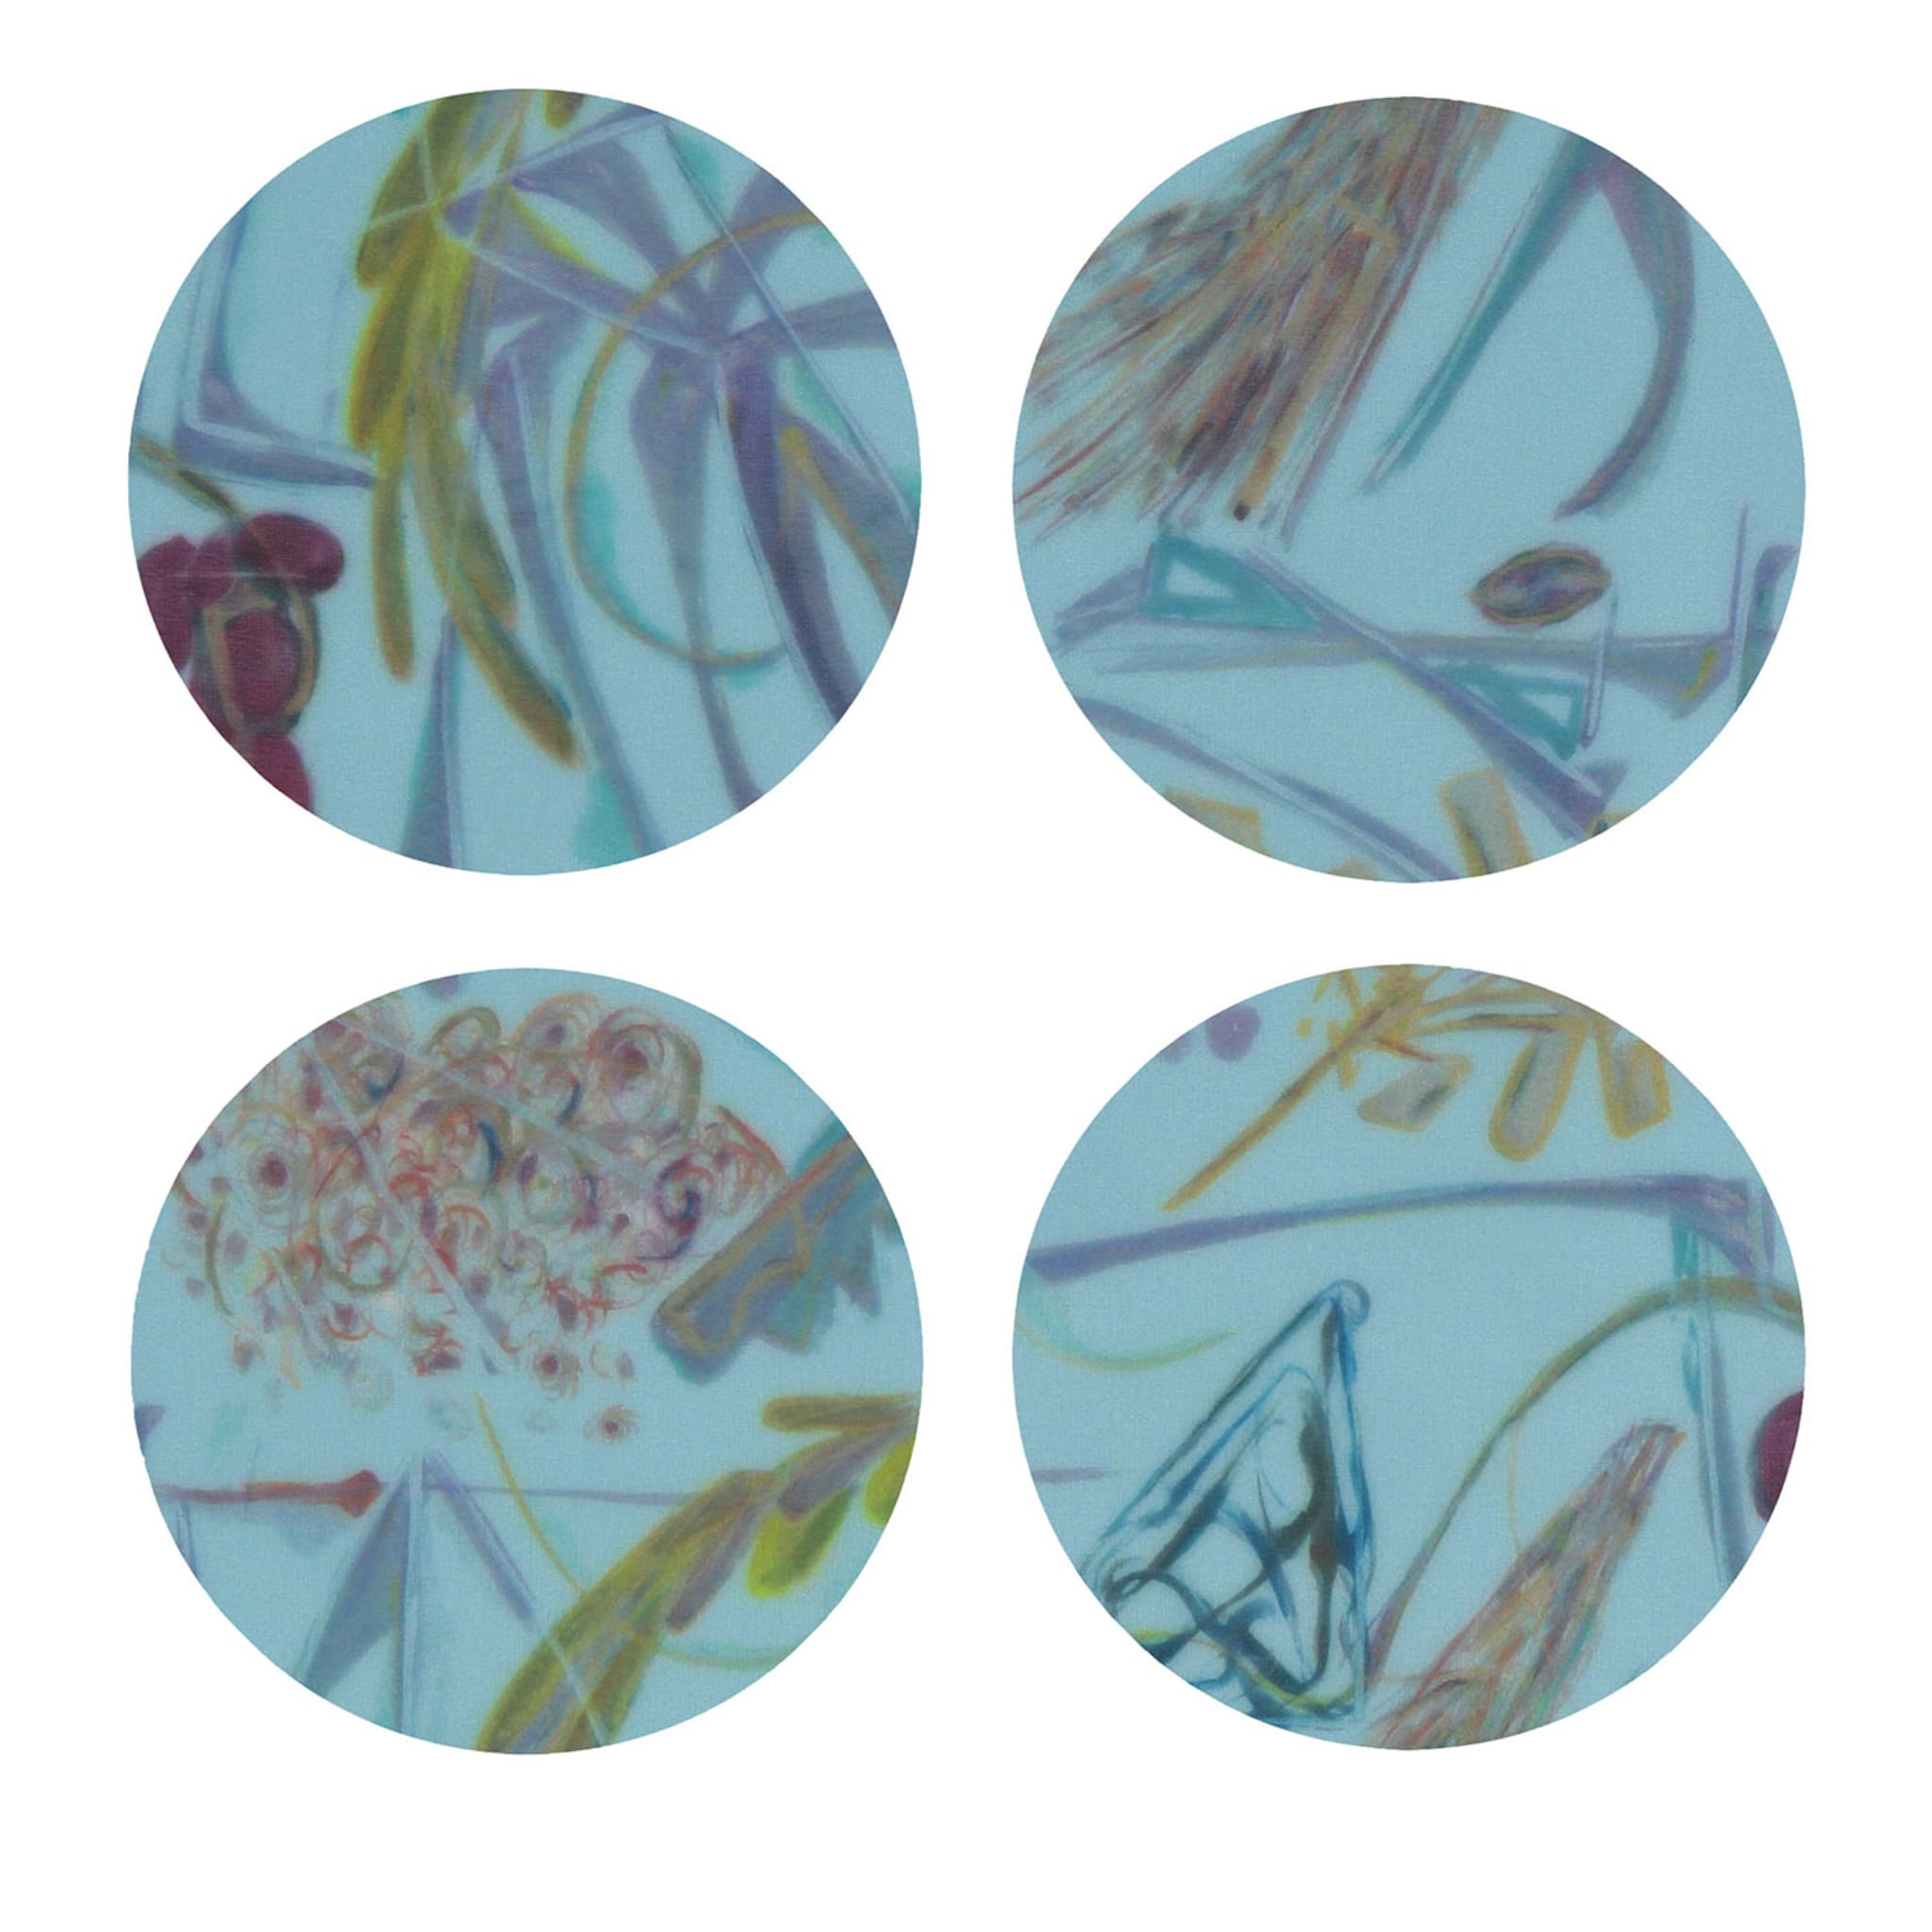 Panarea Set of 8 Patterned Polychrome Coasters  - Main view